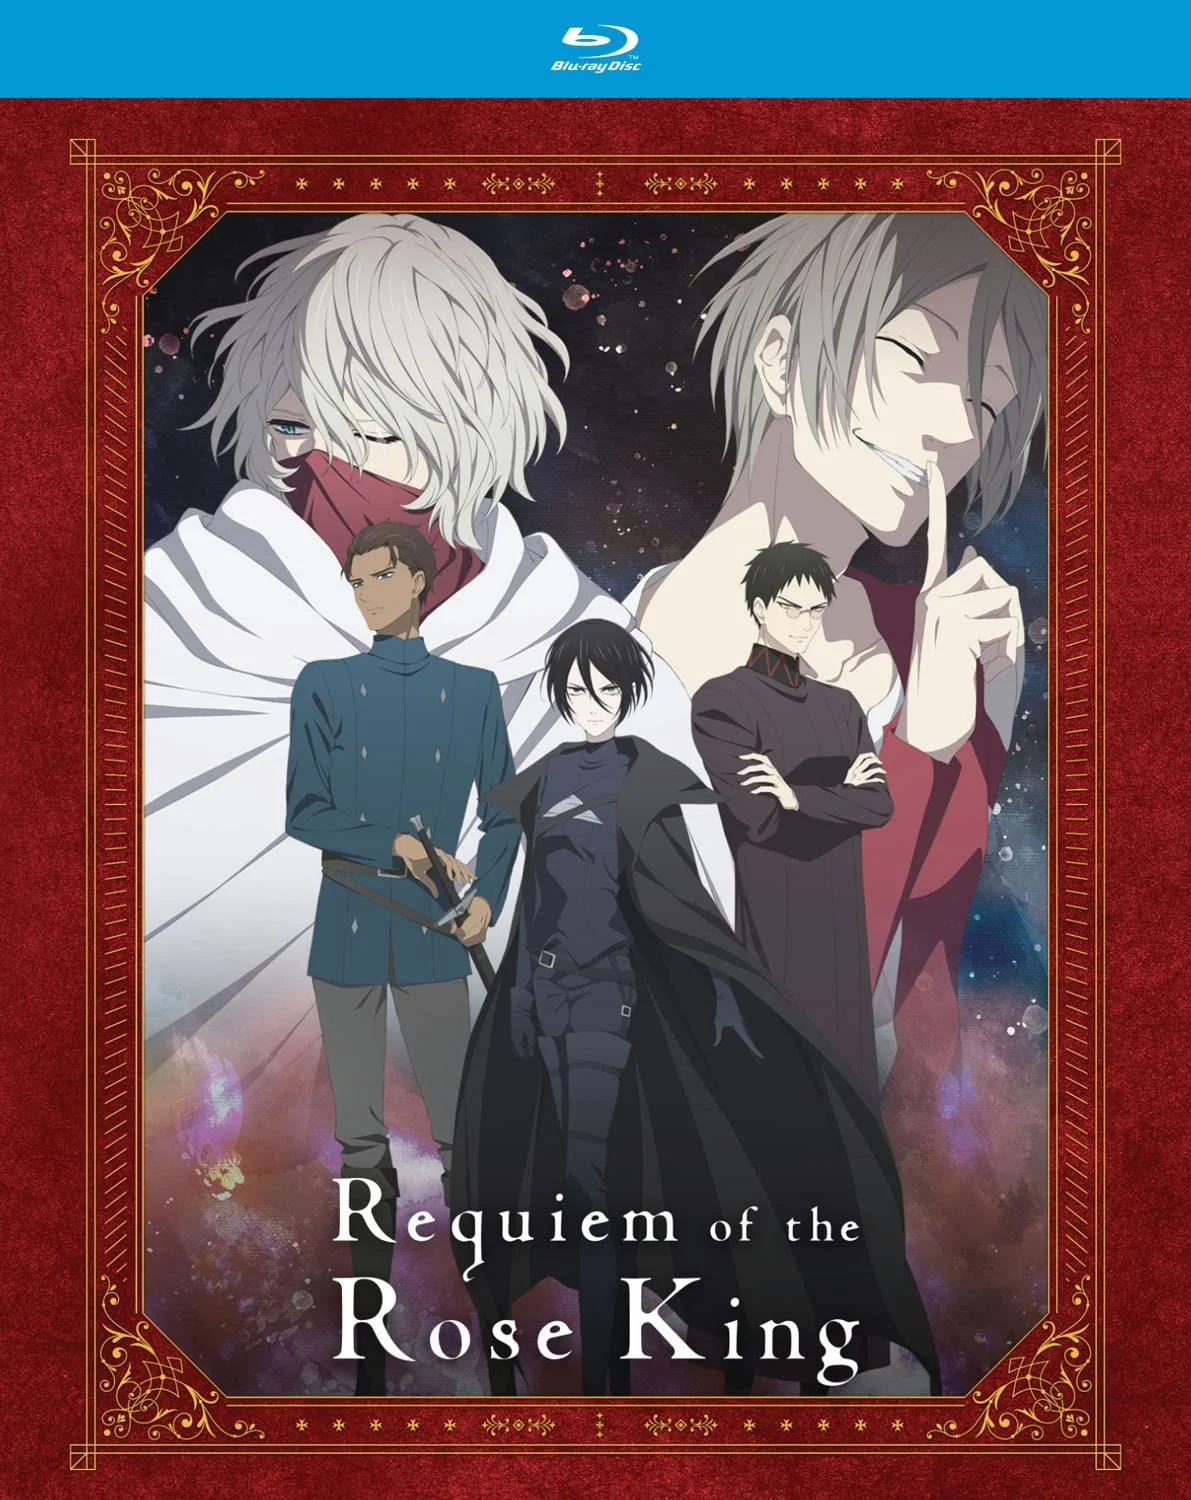 Requiem of the Rose King – Part 2 (Blu-ray)